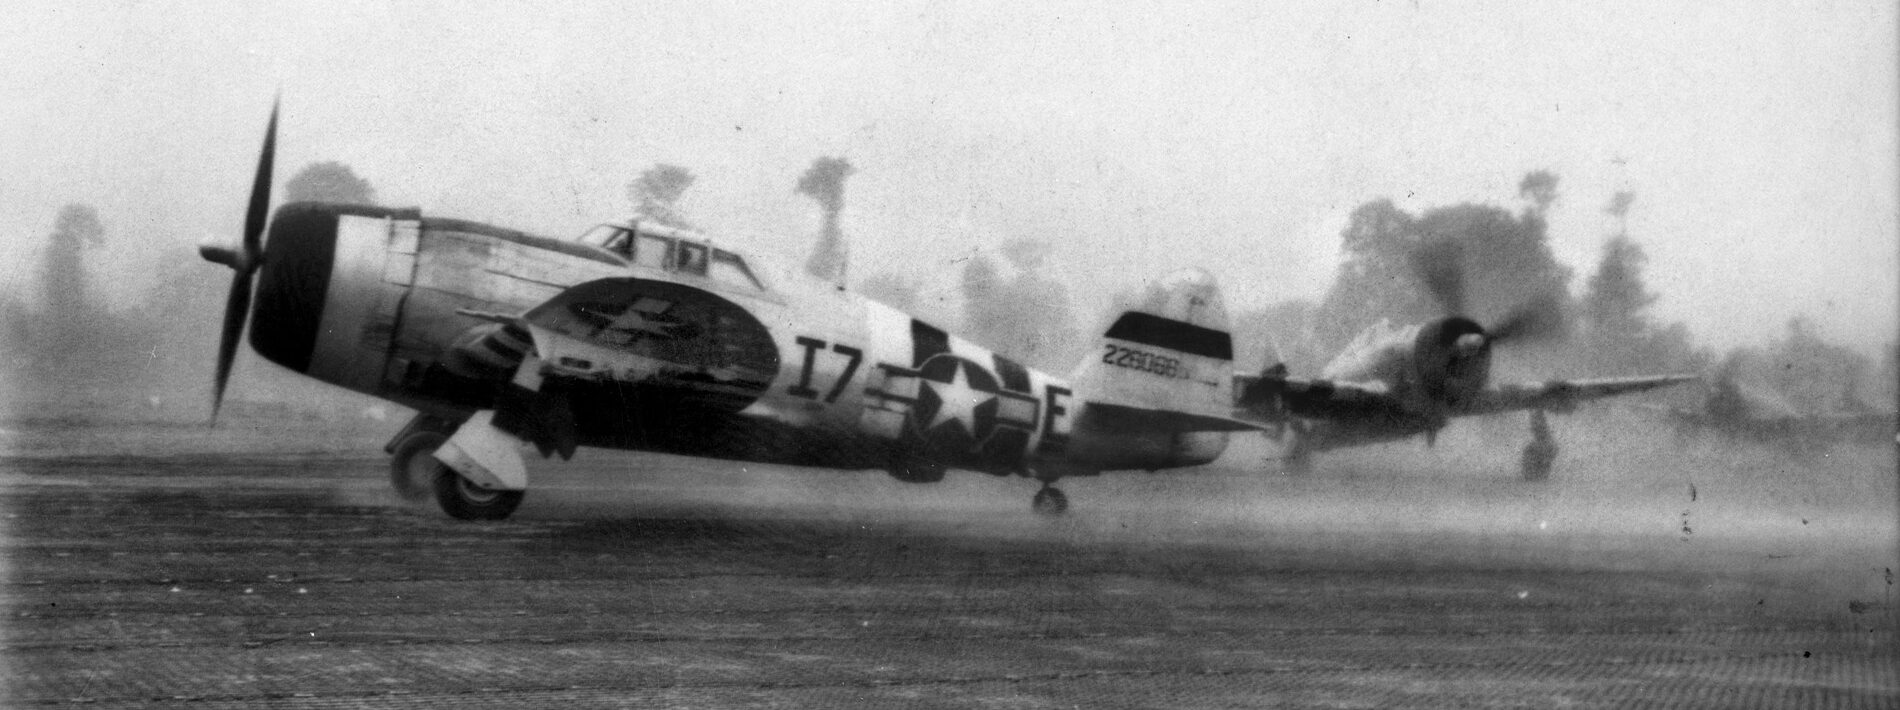 P-47s of the 48th Fighter Group prepare to take off from a French field in 1944, taxiing on metal Marston Mats that were moved with the unit as it advanced toward Germany.